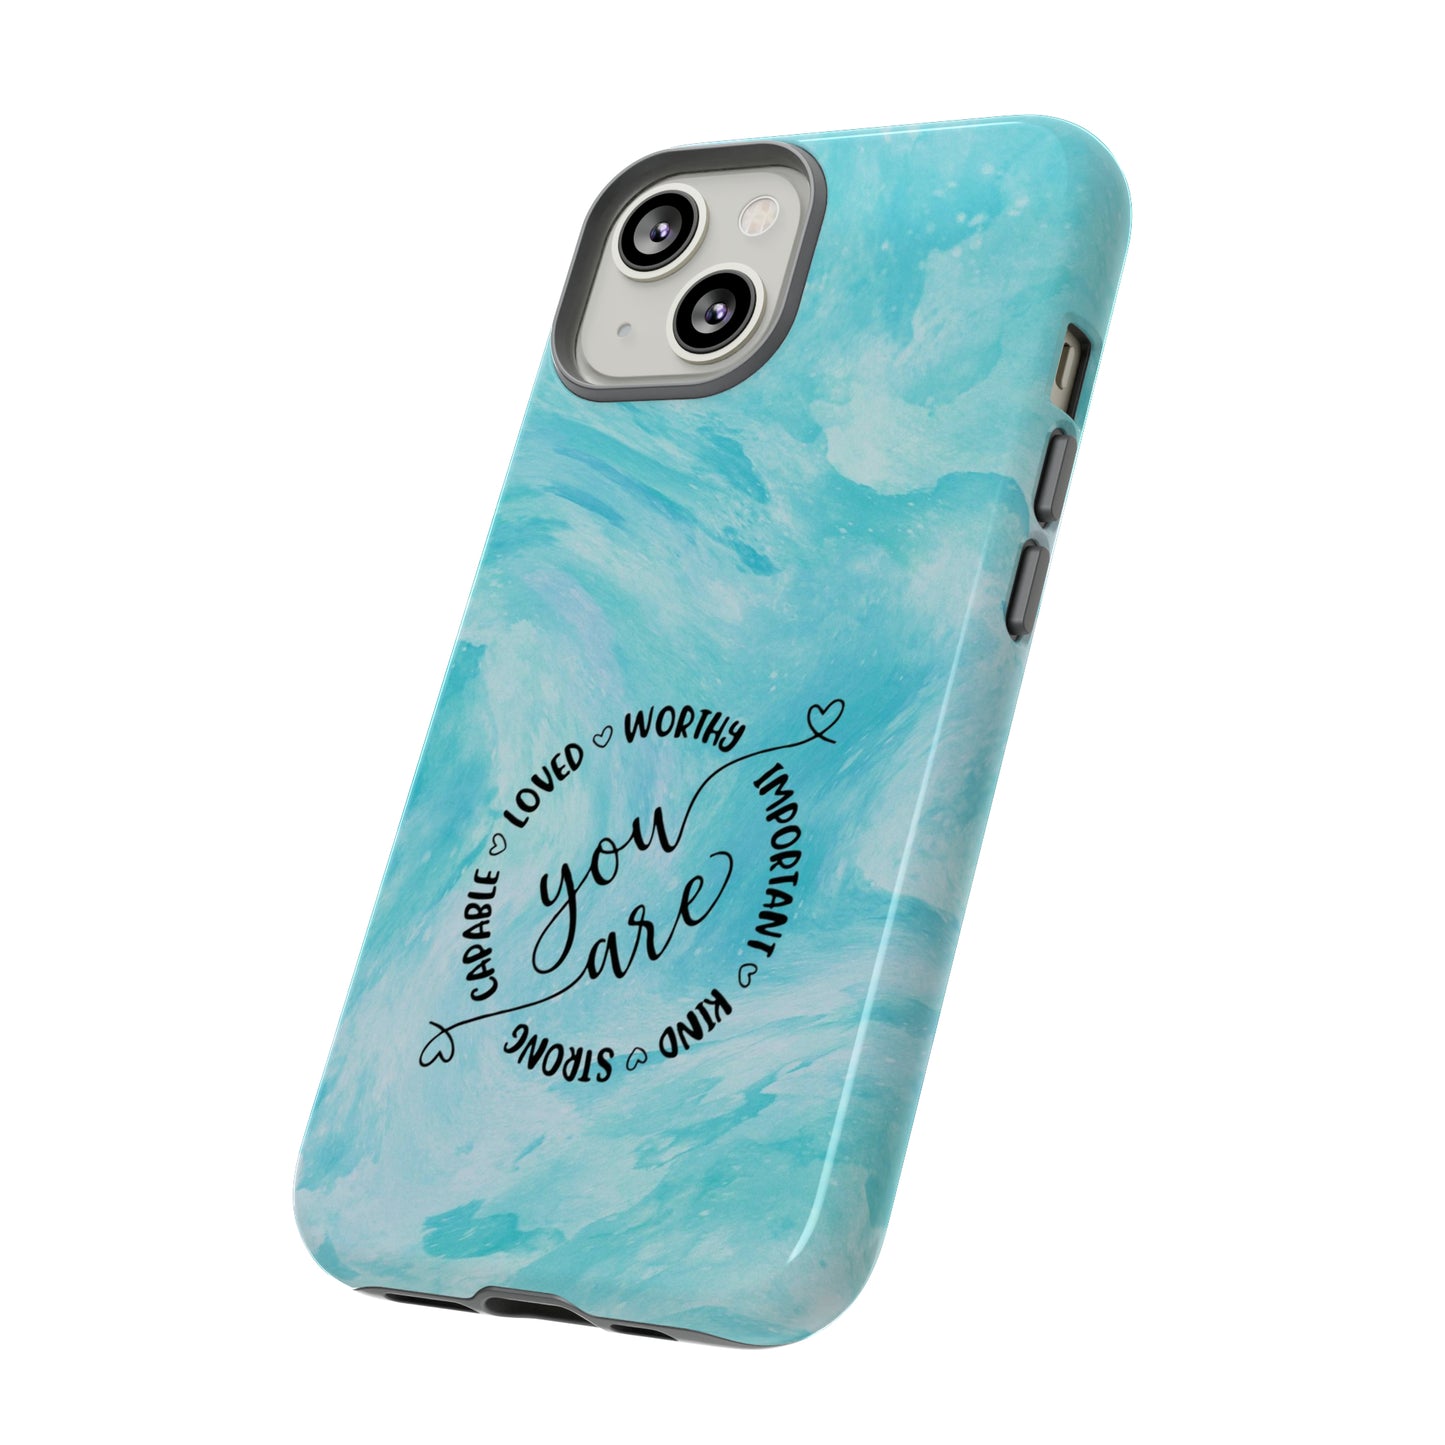 You Are IPhone Case, Inspiration IPhone Case, Phone Case, You Are Strong, Loved, Worthy, Important, Kind, Capable, Inspiring Message IPhone